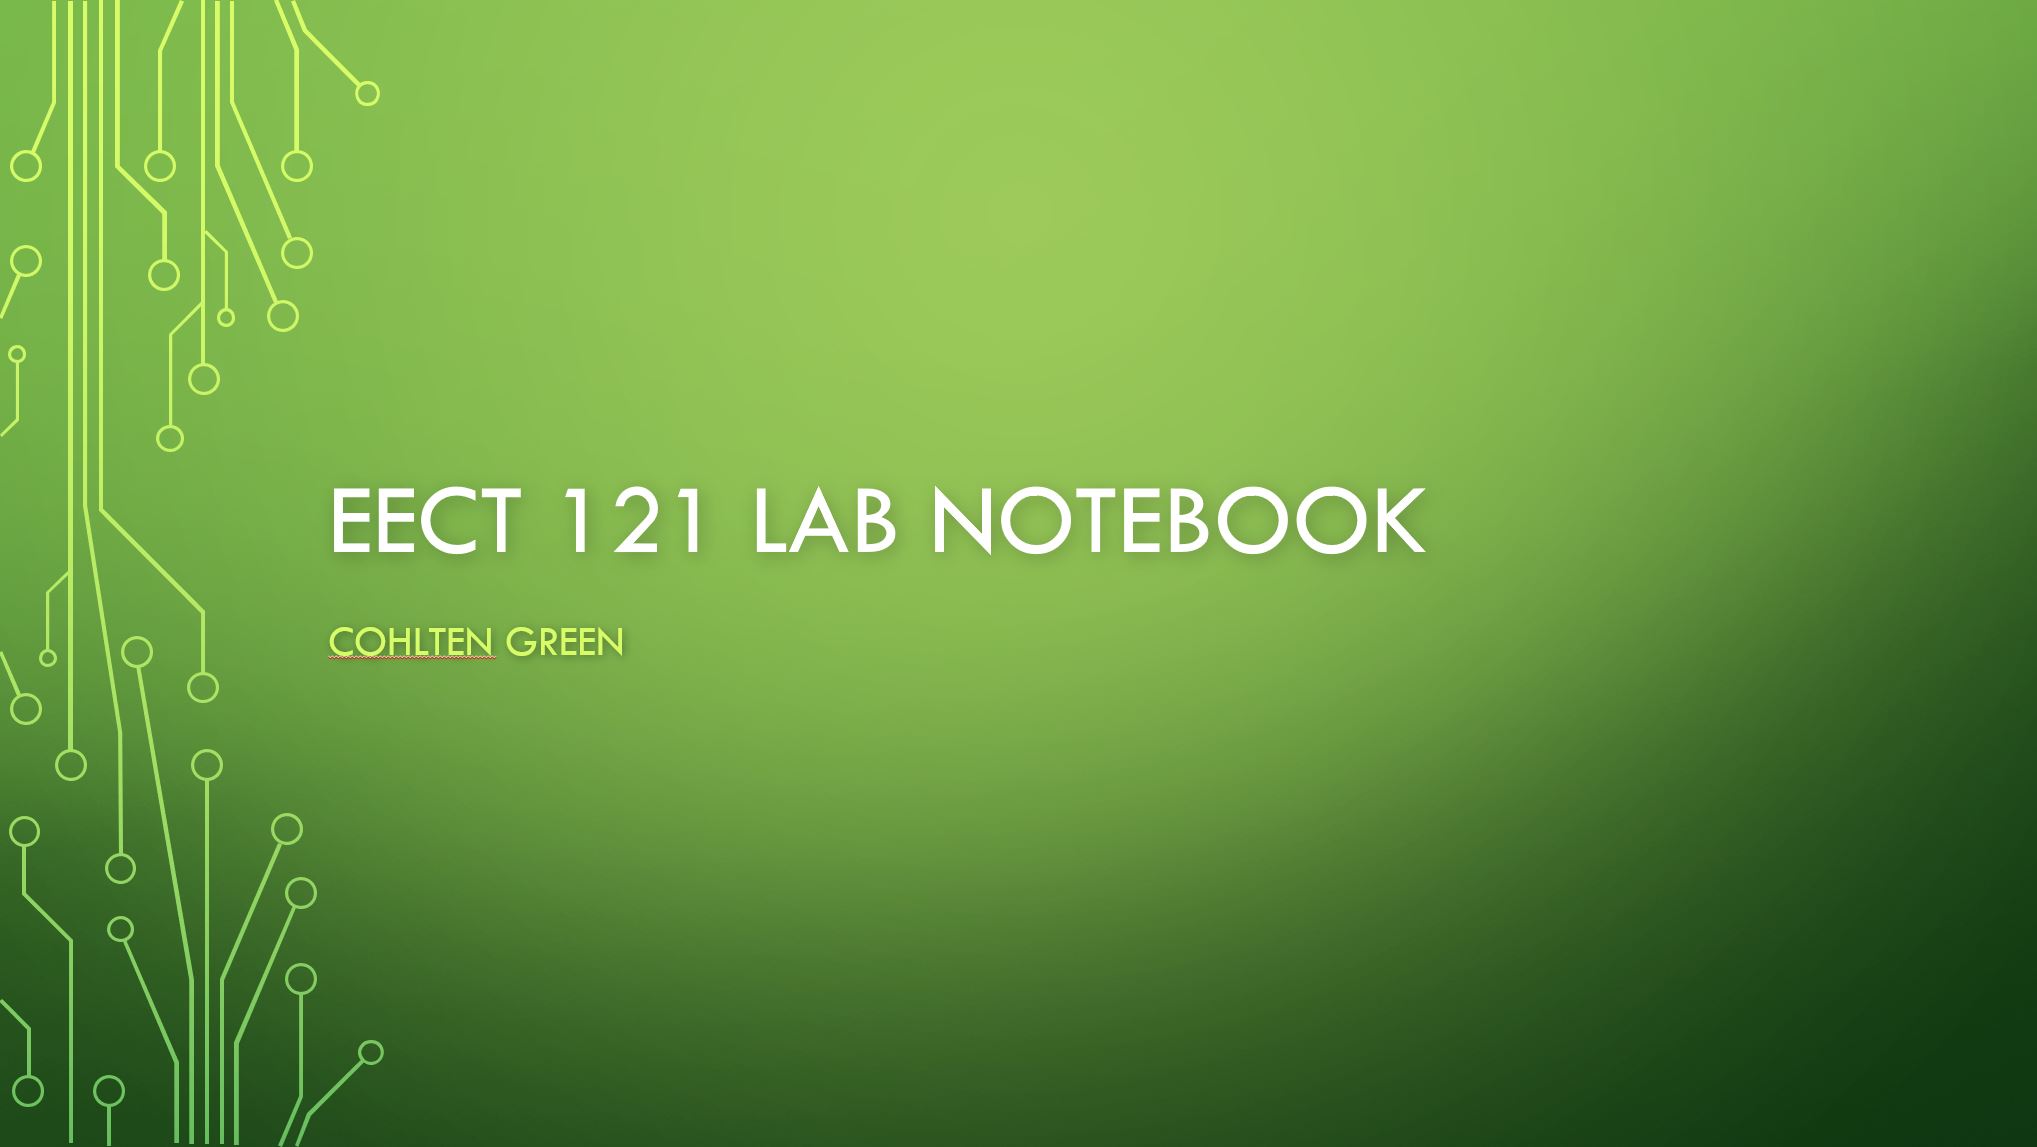 EECT 121 Lab Notebook